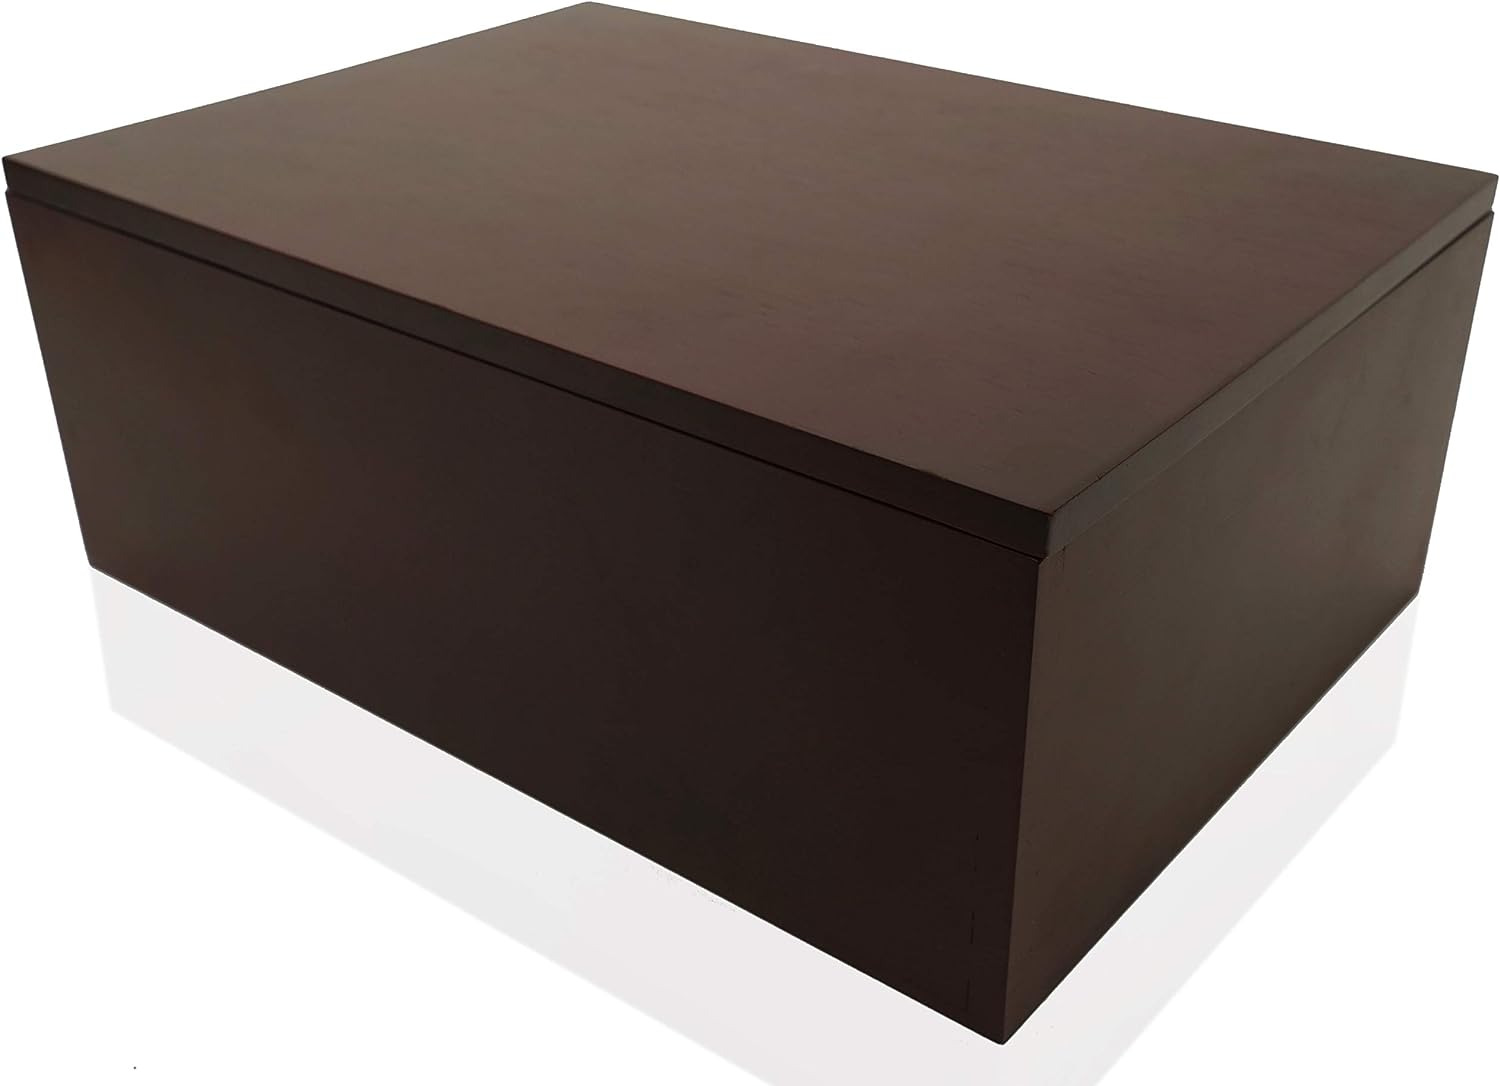 Wooden Storage Box for Home - Large Wood Keepsake Box with Lid - Dark Brown